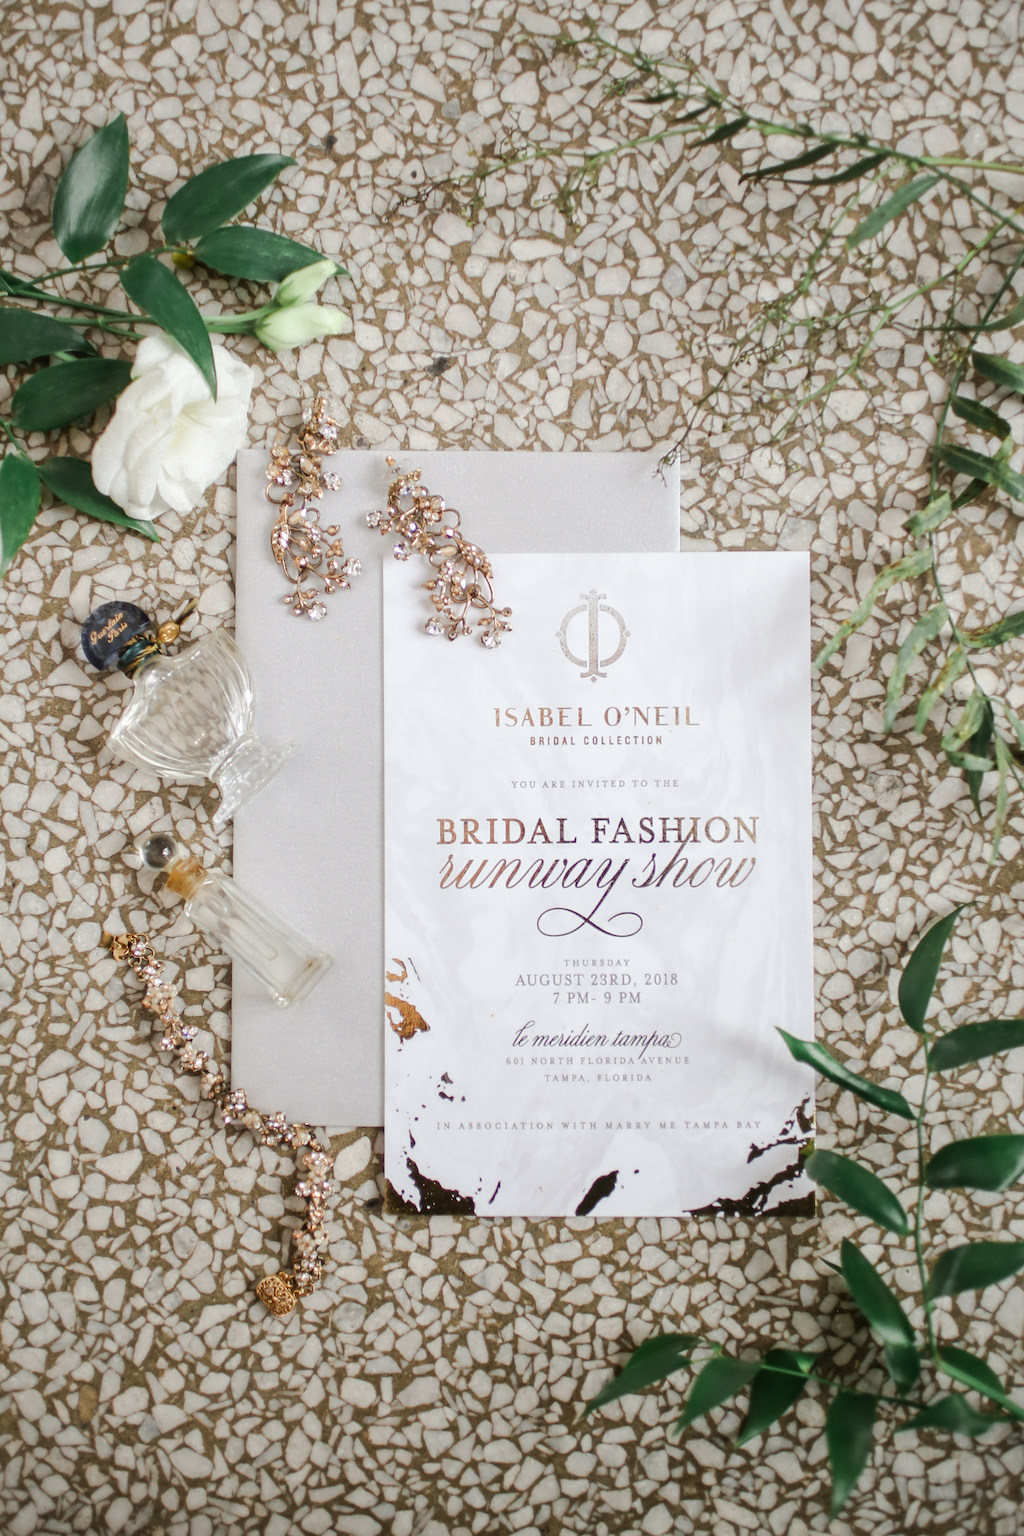 Modern Gold Foil Wedding Invitation, Crystal Gold Earrings and Perfume Bottle | Marry Me Tampa Bay and Isabel O'Neil Bridal Fashion Runway Show 2018 | Tampa Wedding Photographer Lifelong Photography Studios | Invitation URBANcoast